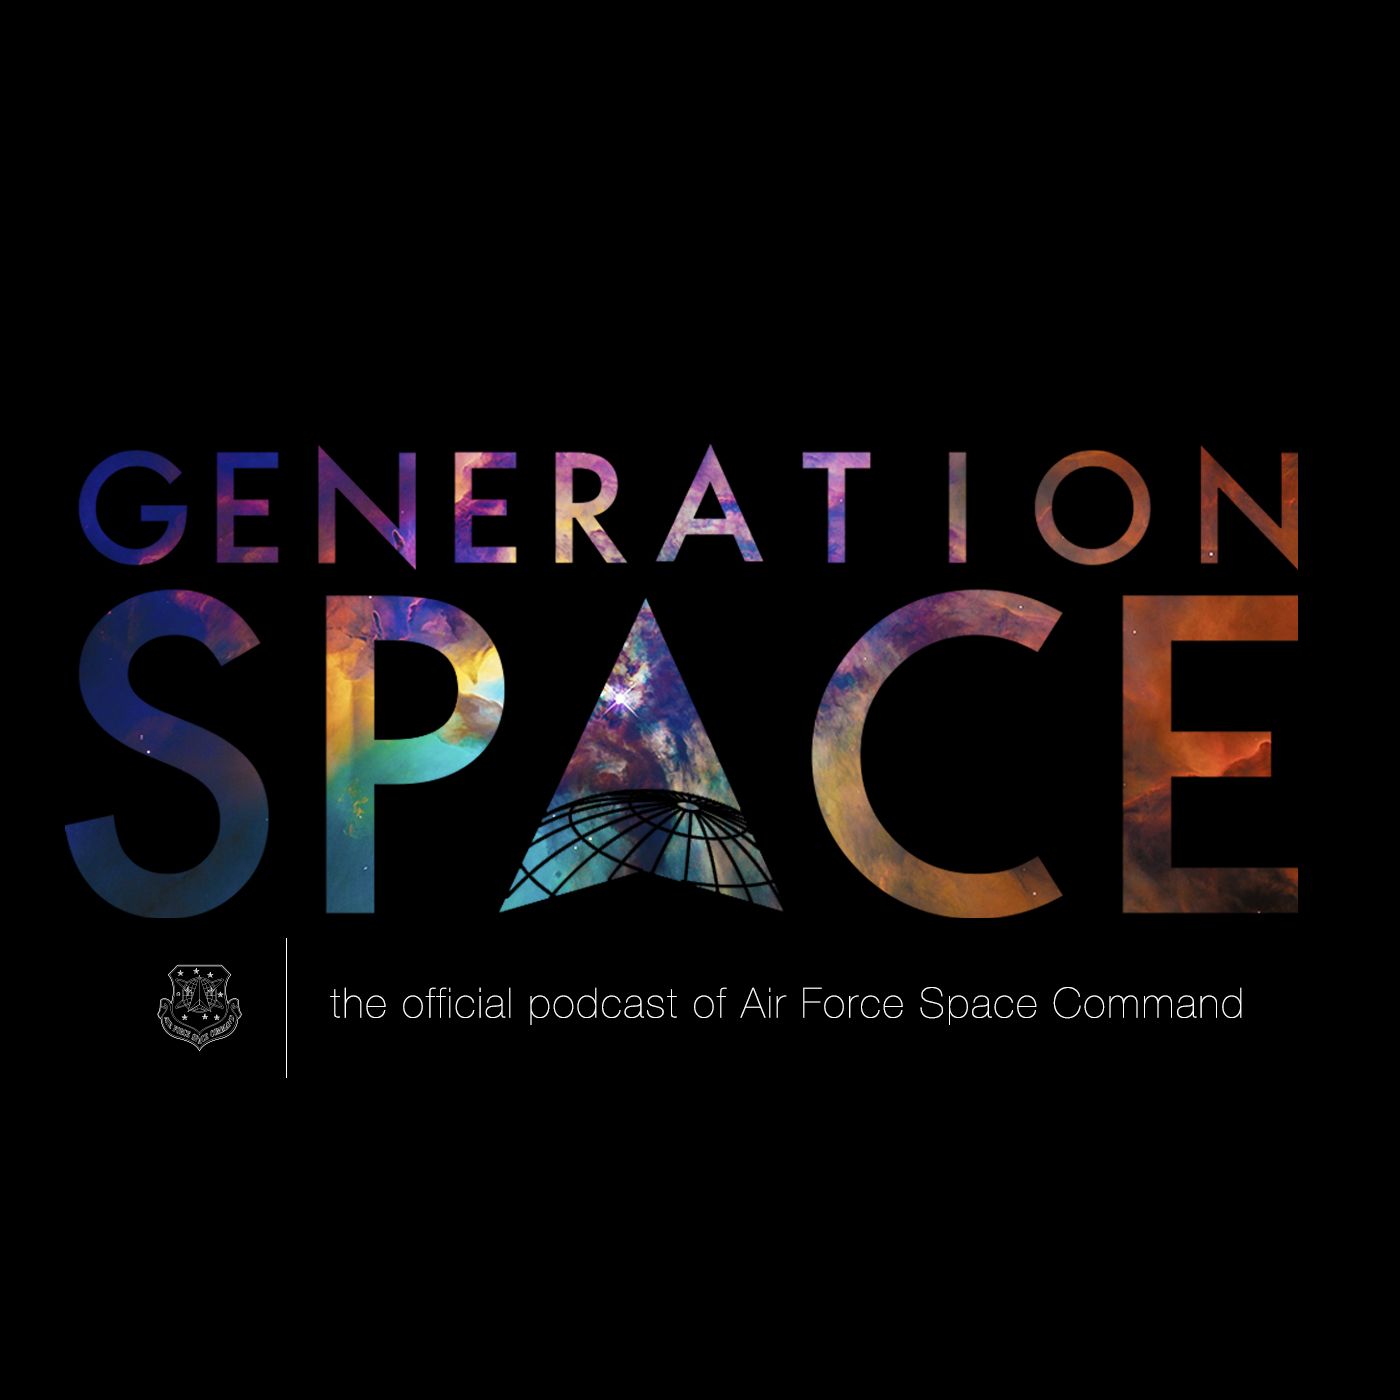 Generation Space:  The Official Podcast of Air Force Space Command